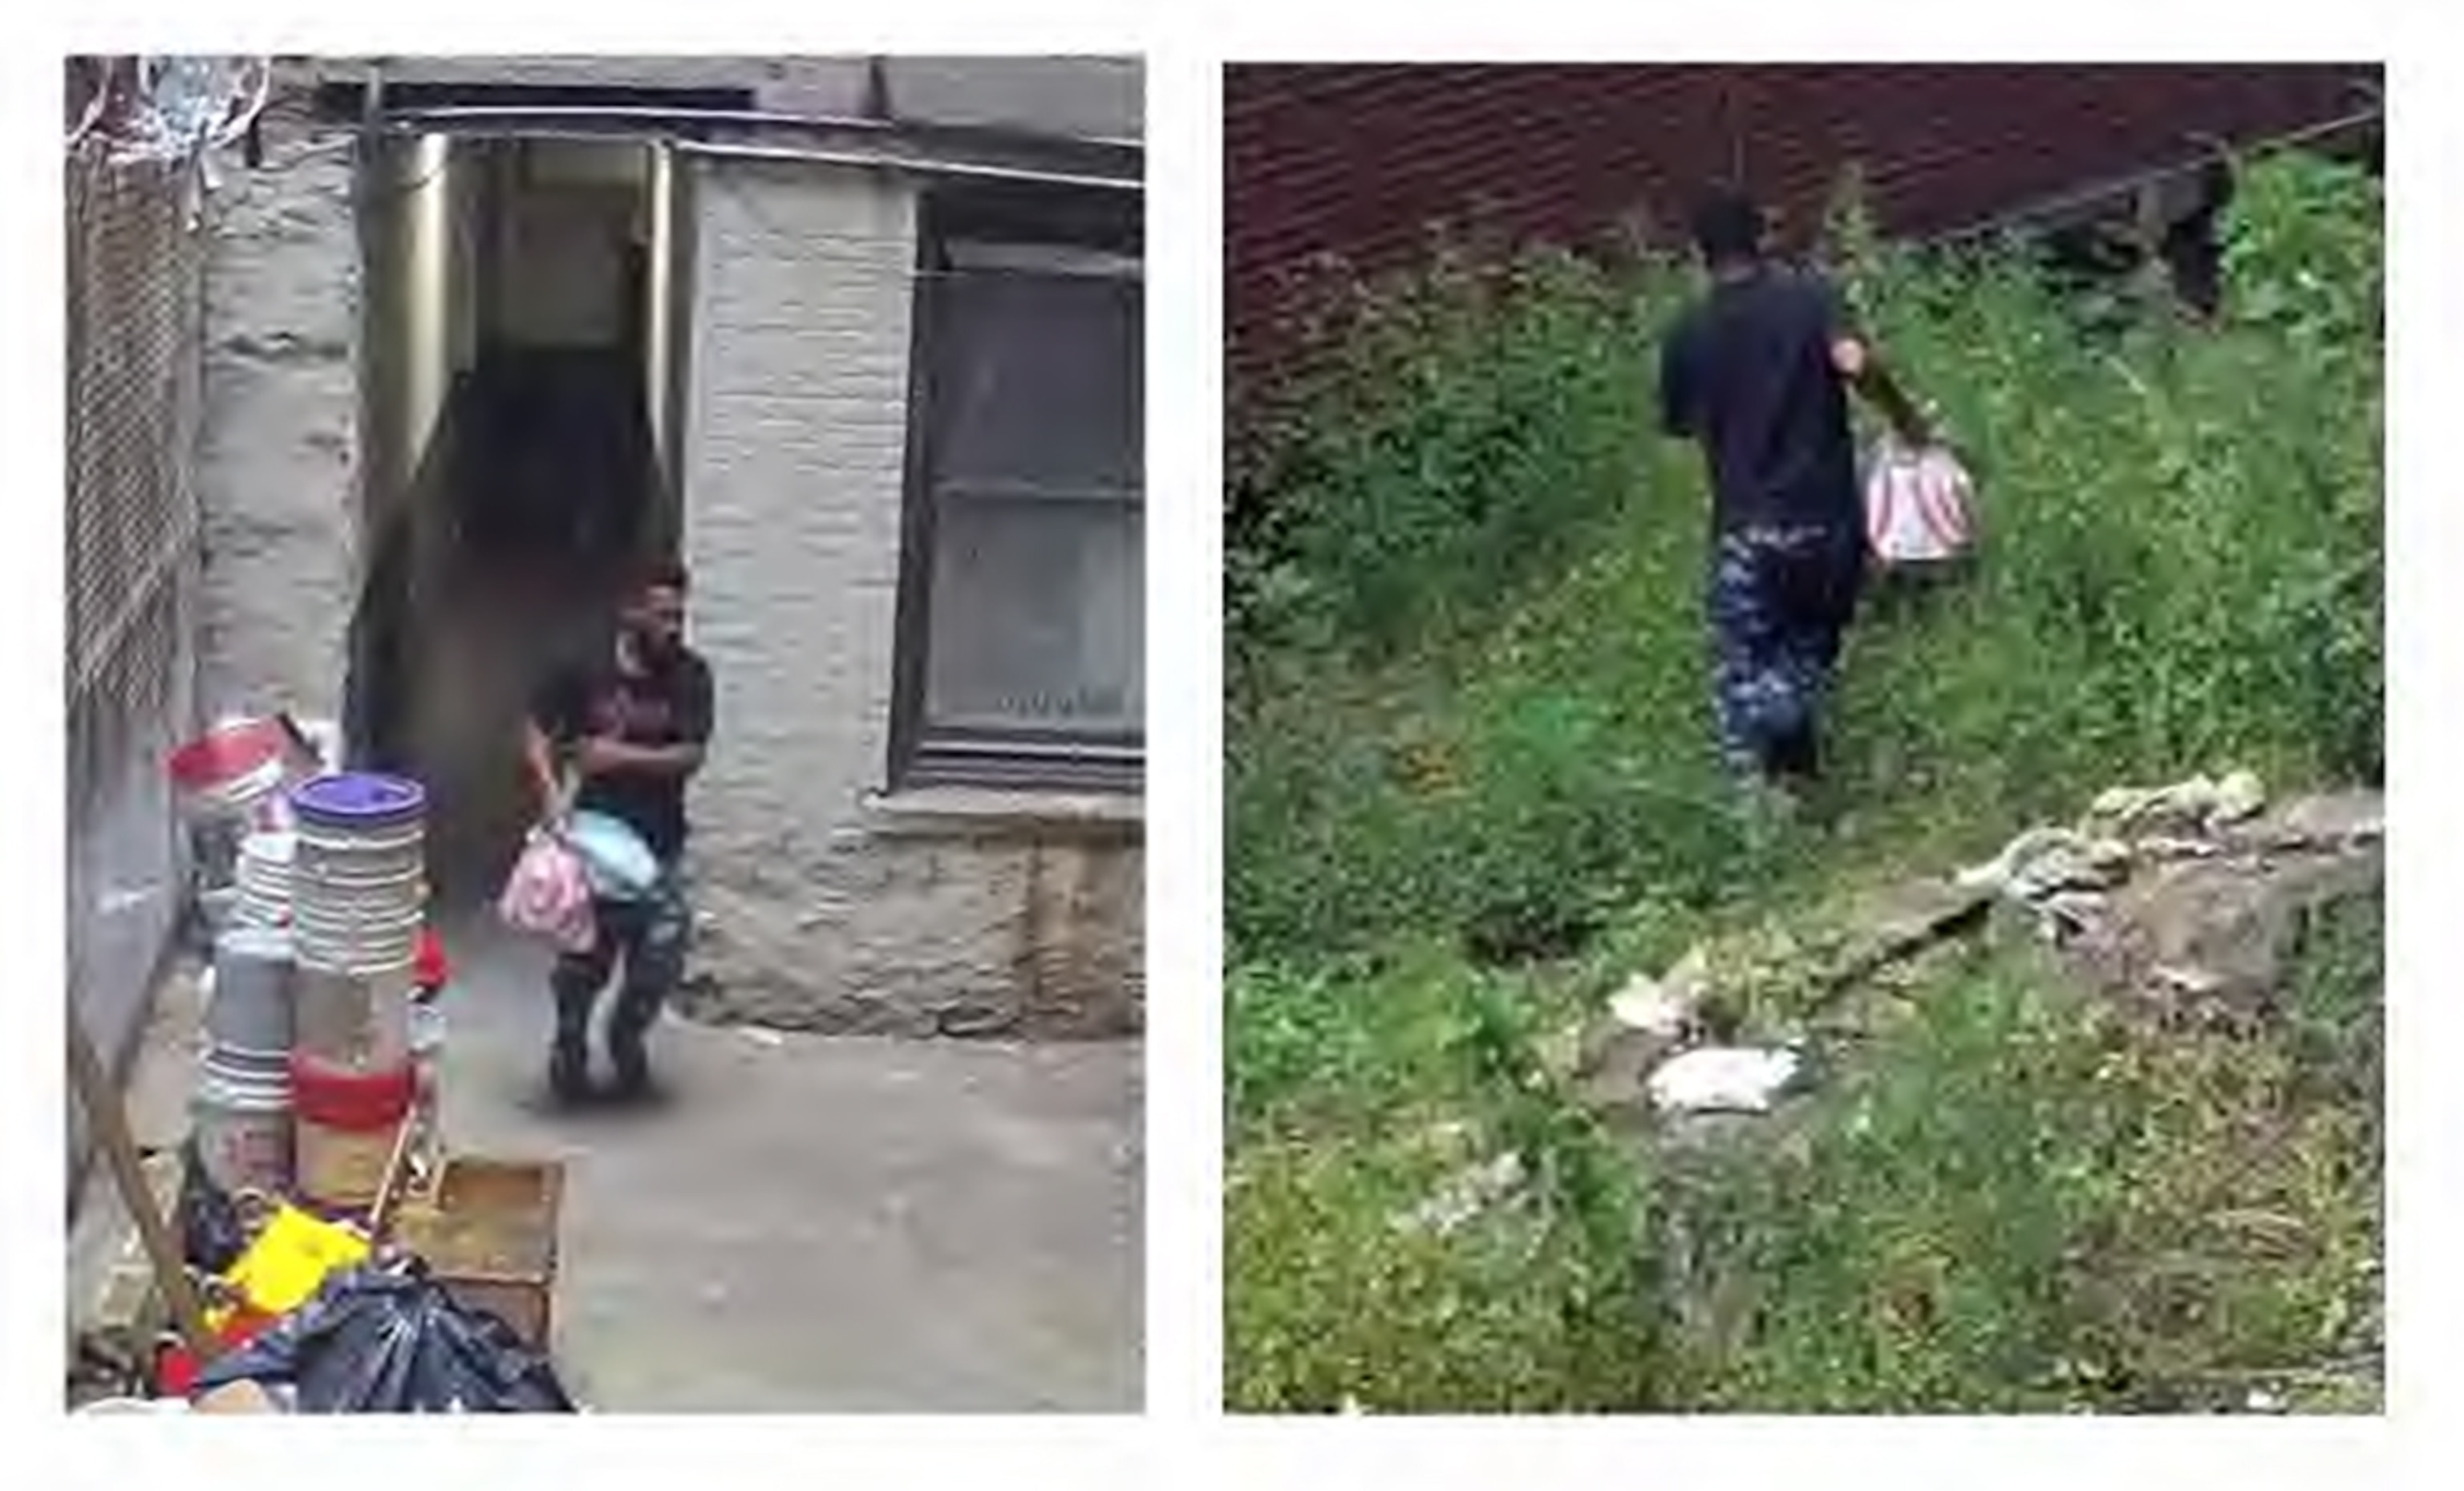 PHOTO: Images contained from a federal criminal compliant show a suspect in the Bronx day care fentanyl poisoning case carrying bags out the back alley behind the day care building in New York.